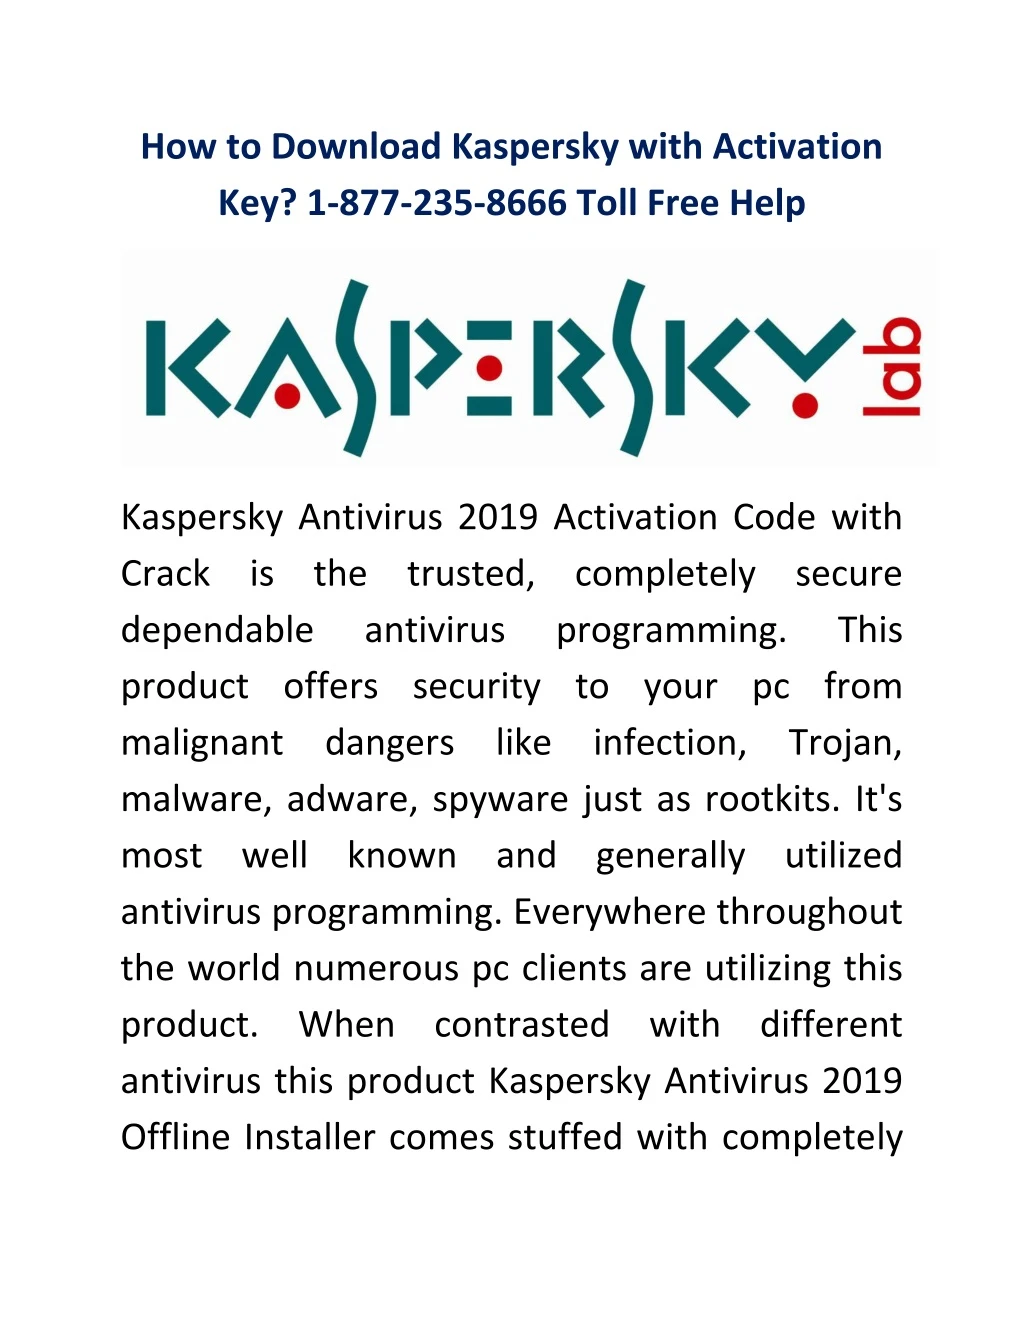 how to download kaspersky with activation